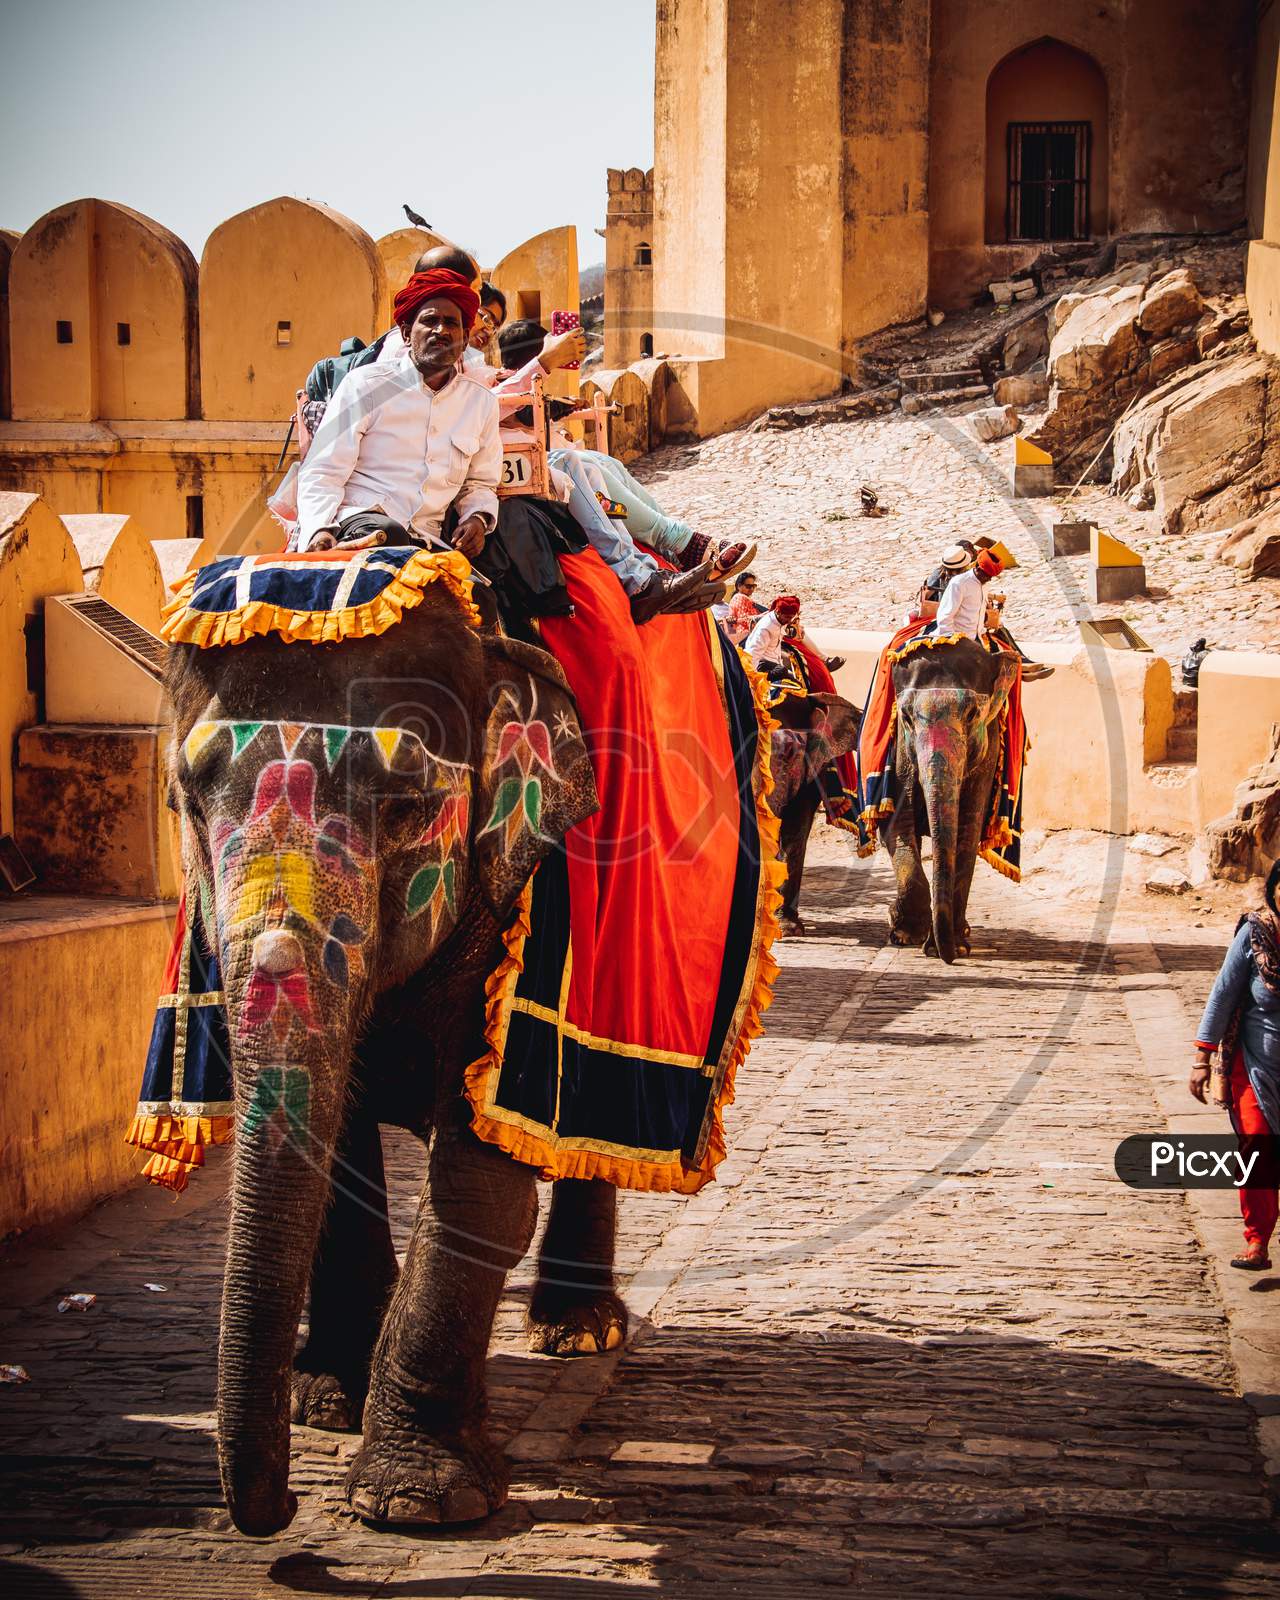 Rajasthani Elephant and people's Photograph